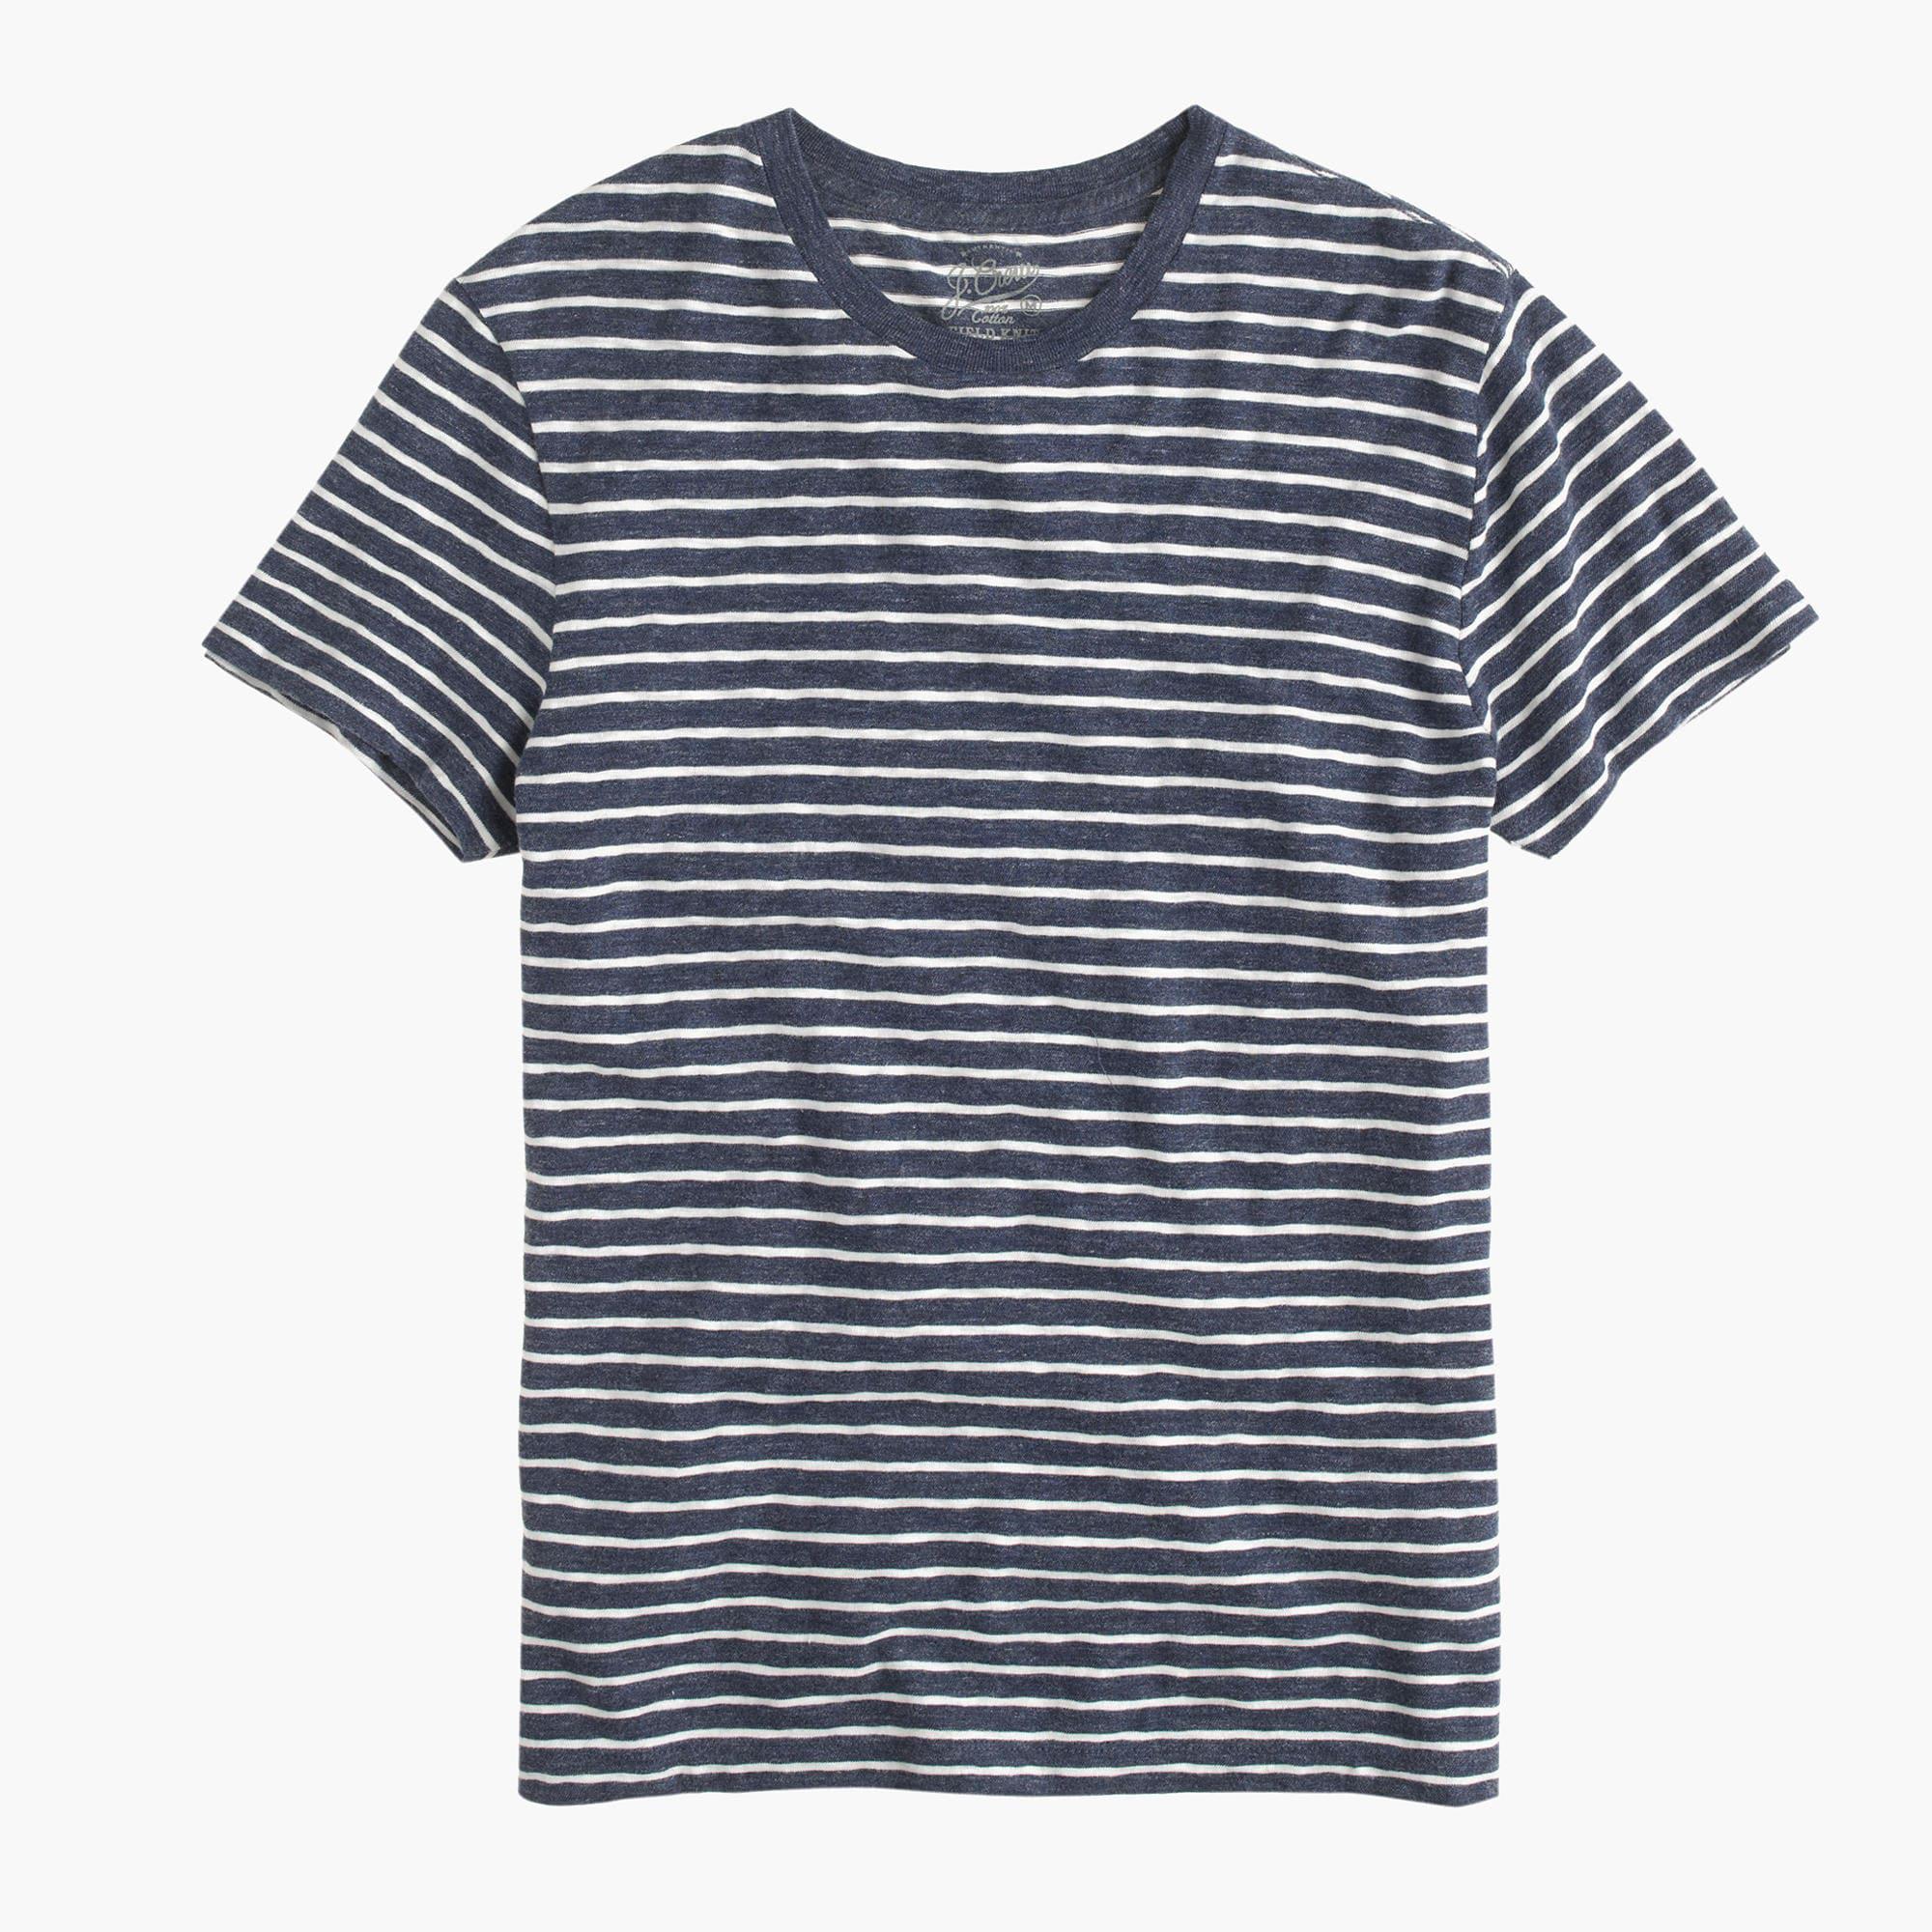 J.Crew Cotton Nautical-striped Heathered T-shirt in Blue for Men - Lyst